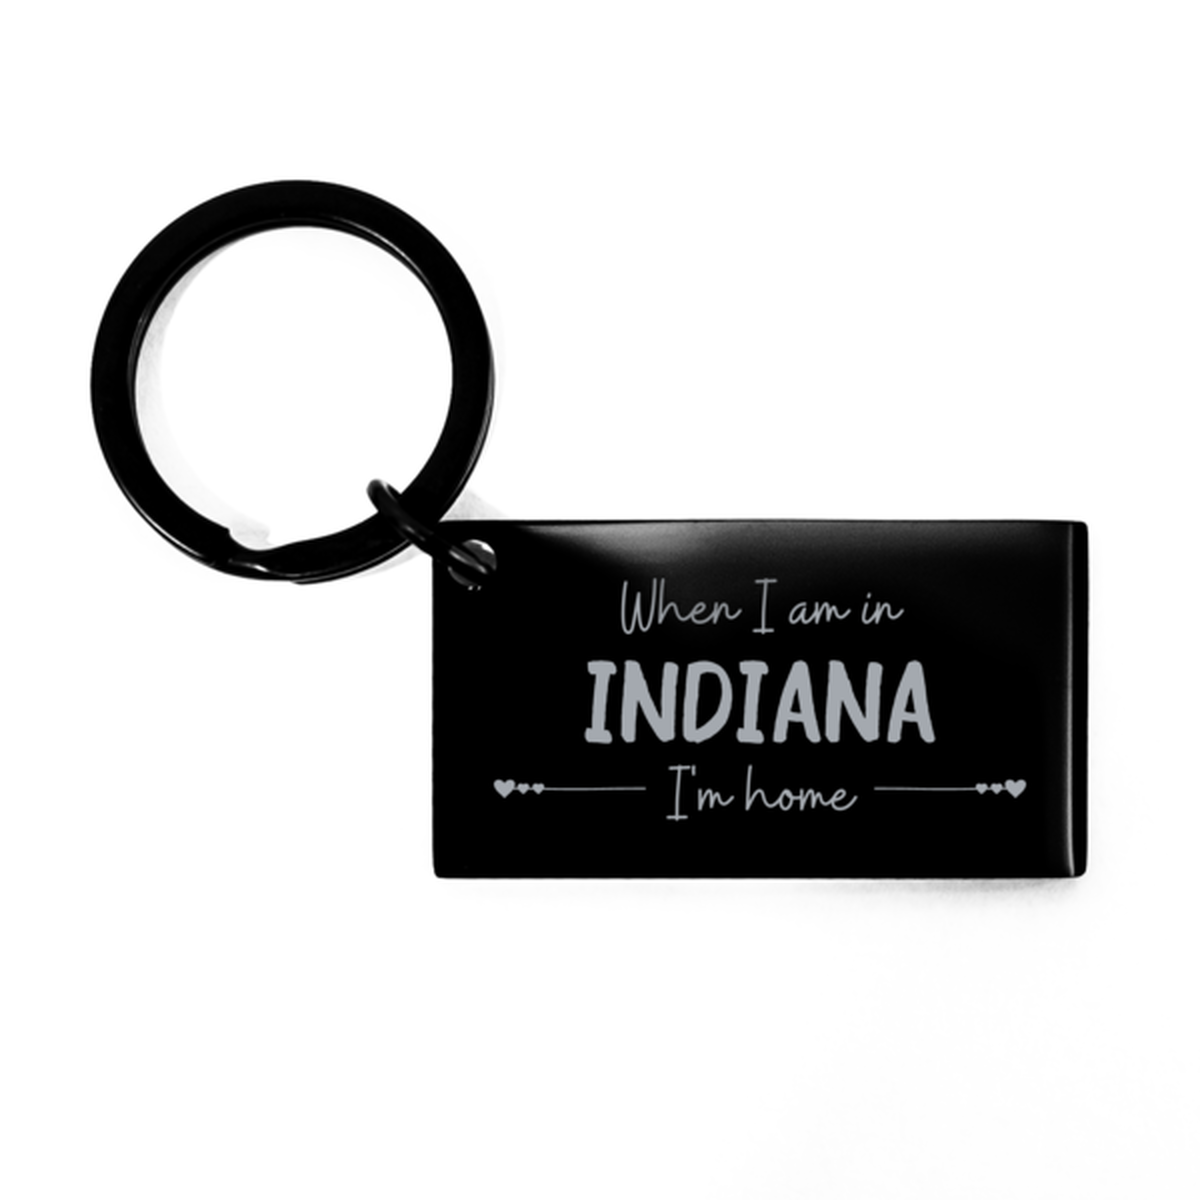 When I am in Indiana I'm home Keychain, Cheap Gifts For Indiana, State Indiana Birthday Gifts for Friends Coworker